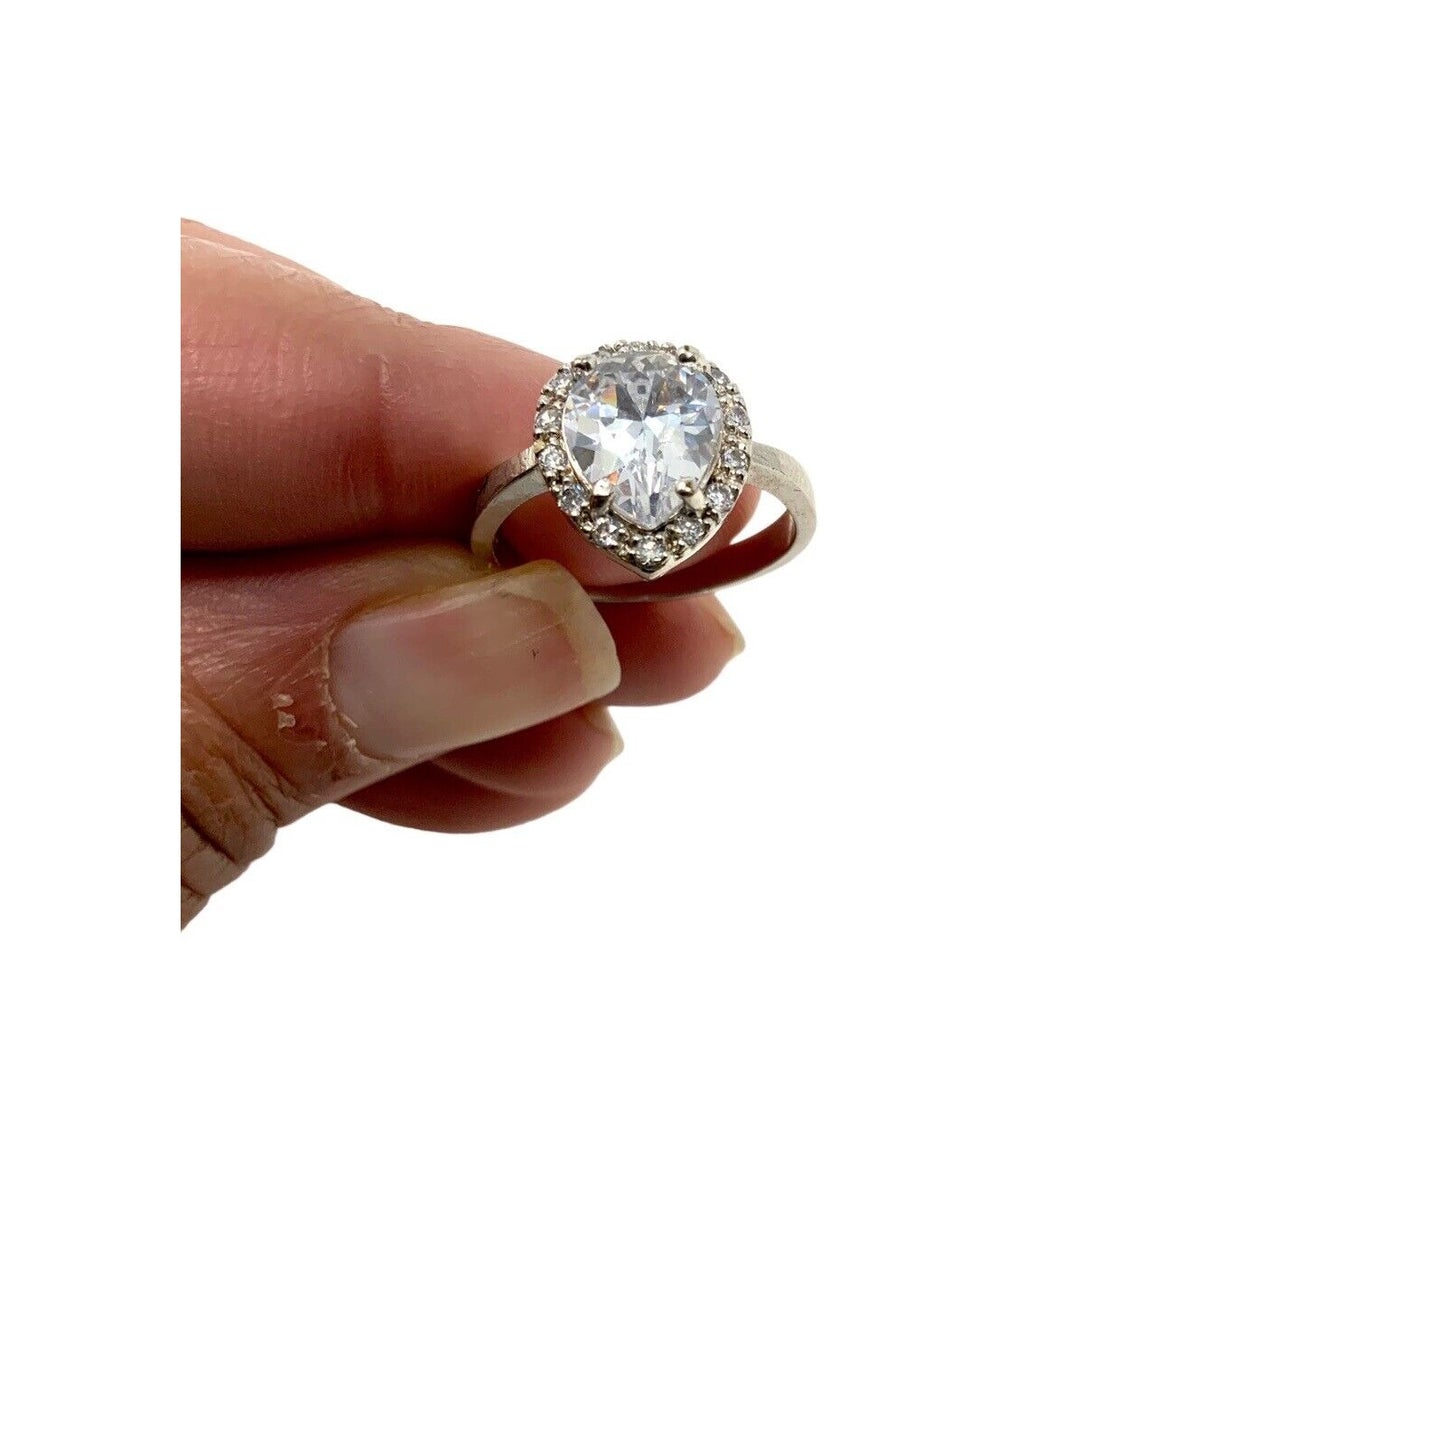 Sterling Silver .925 Engagement Style Ring with Pear-Shaped Cubic Zirconia Stones